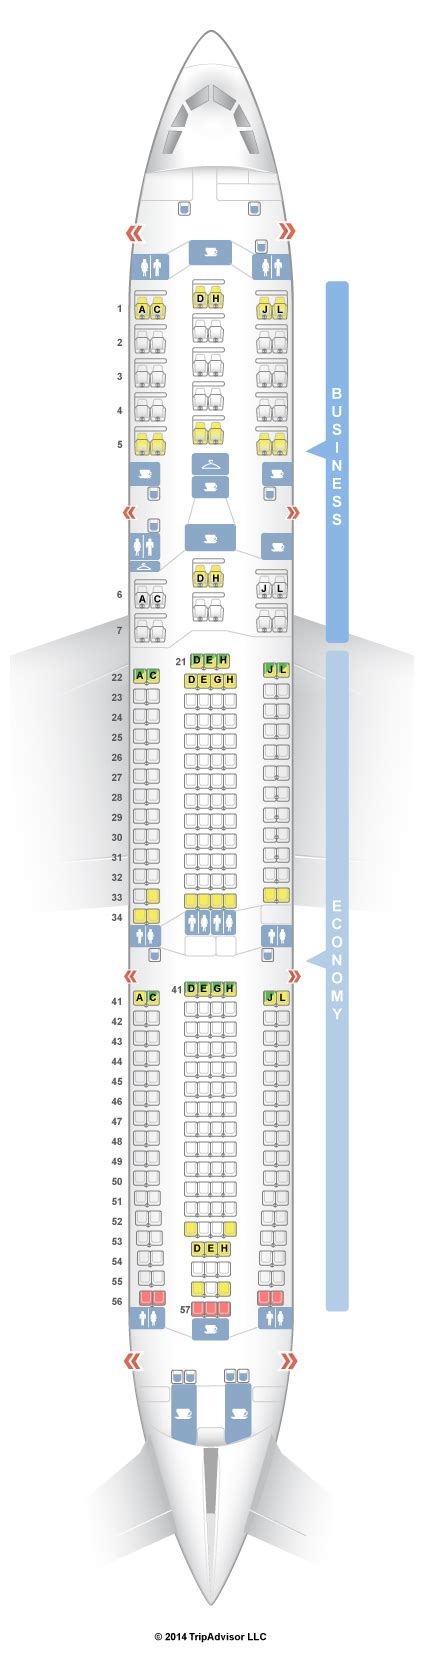 Seat Map Airbus A Finnair Best Seats In The Plane Images And